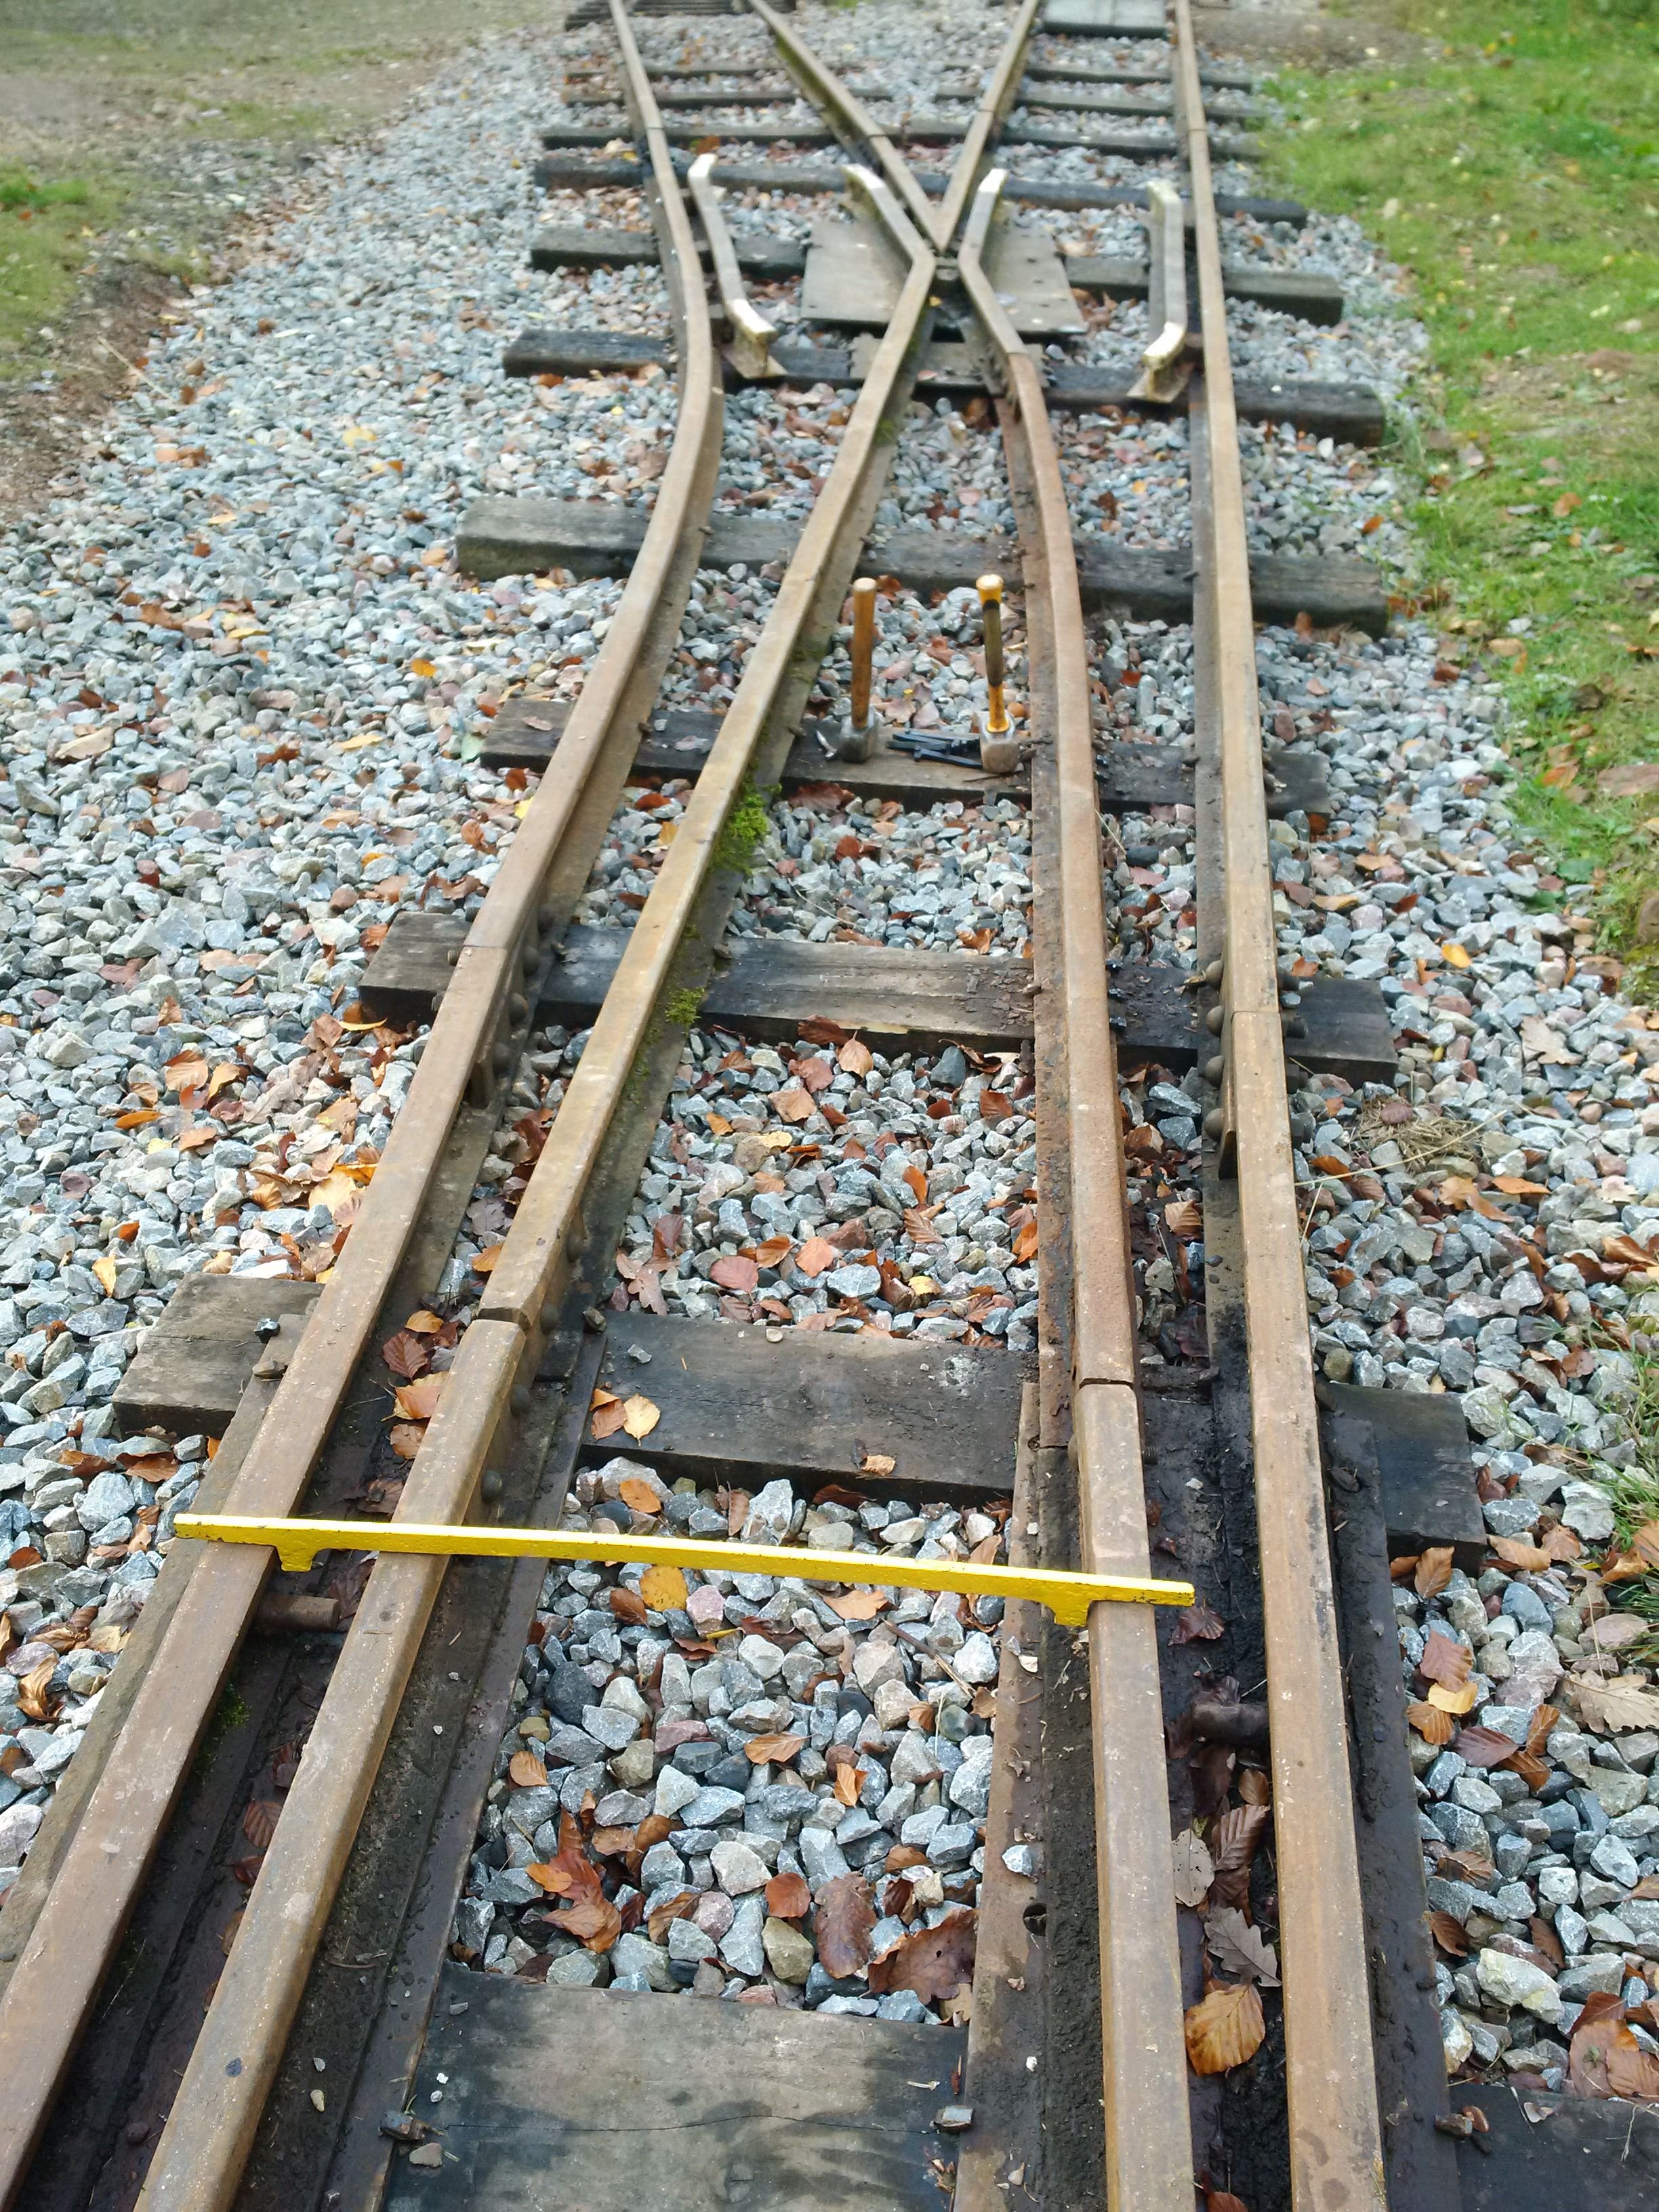 Track gauged ready for welding